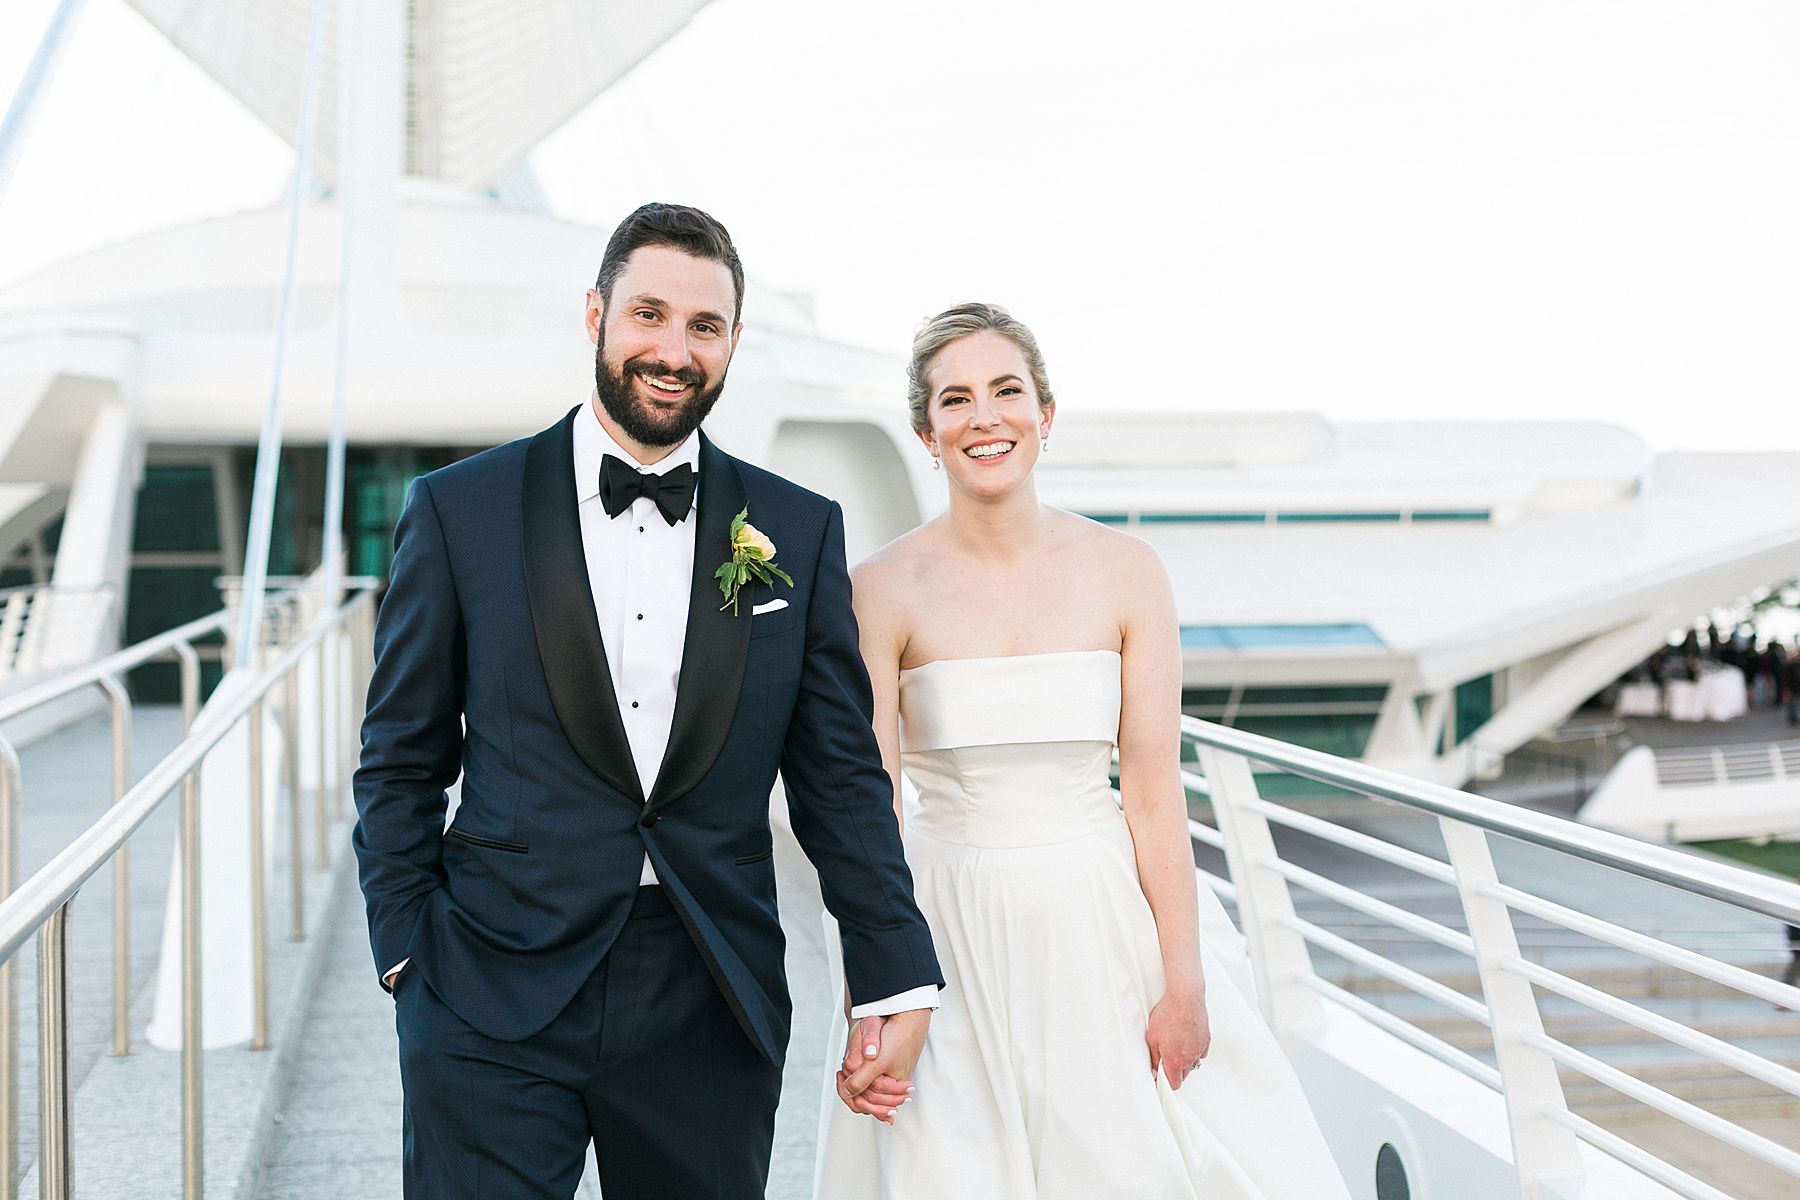 wedding couples newlywed portraits photos at modern minimal milwaukee art museum architectural gem on lake michigan in downtown